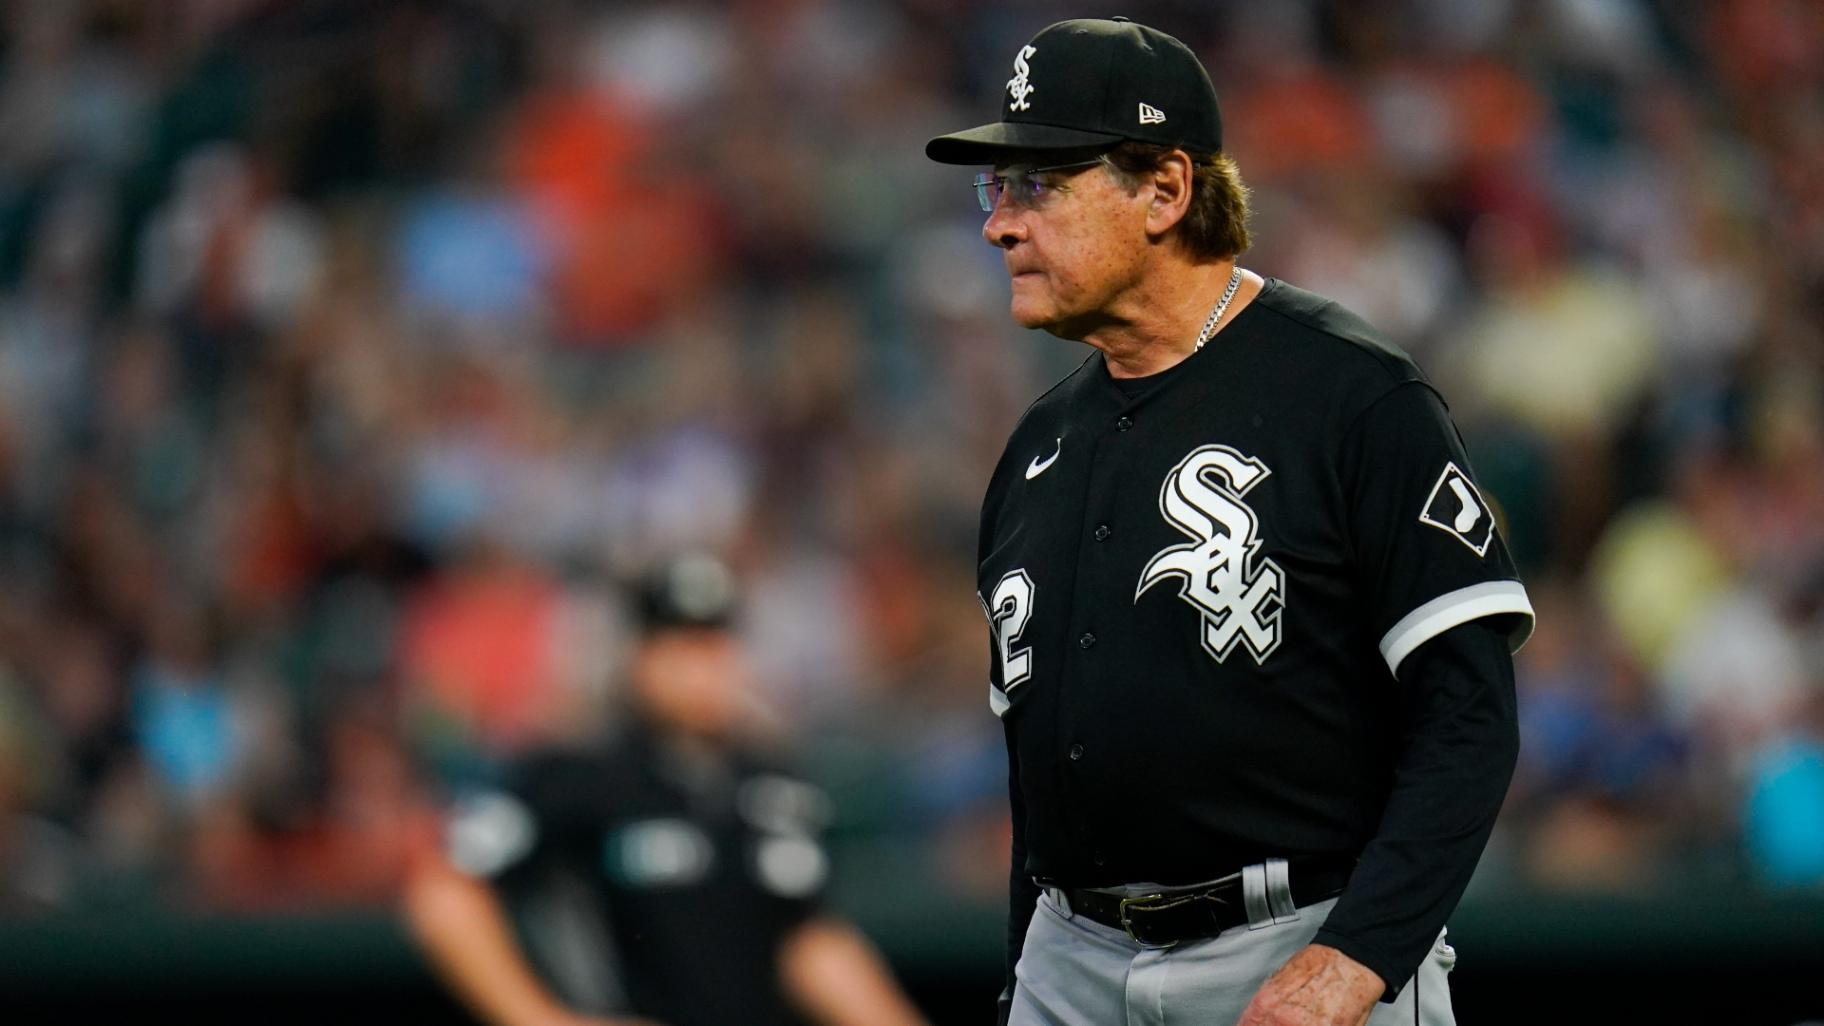 Chicago White Sox: Manager Tony La Russa out for health reasons